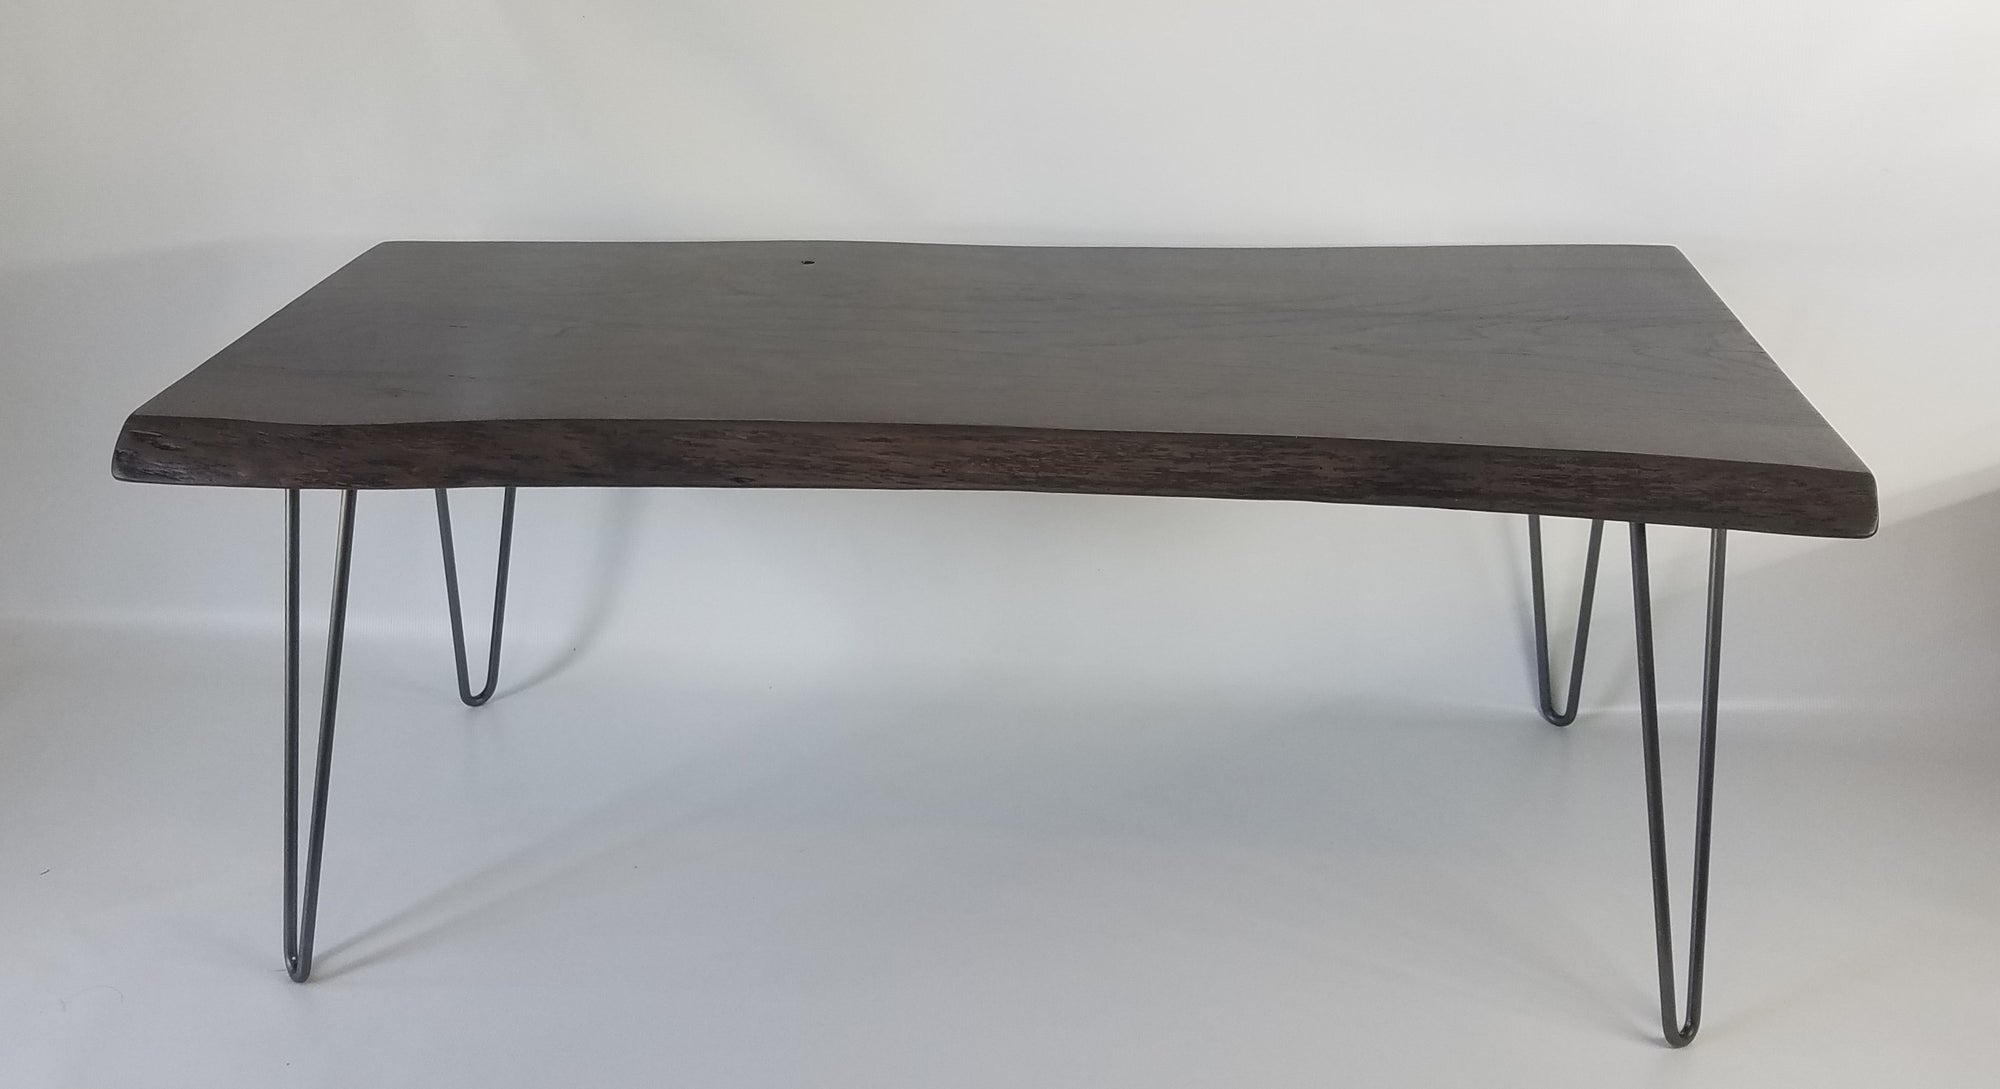 Gray Coffee Table- Live Edge- Weathered Wood- Distressed- Lake House Table- Fumed Oak- Natural Wood- Cool Furniture- Handmade- Mid Century